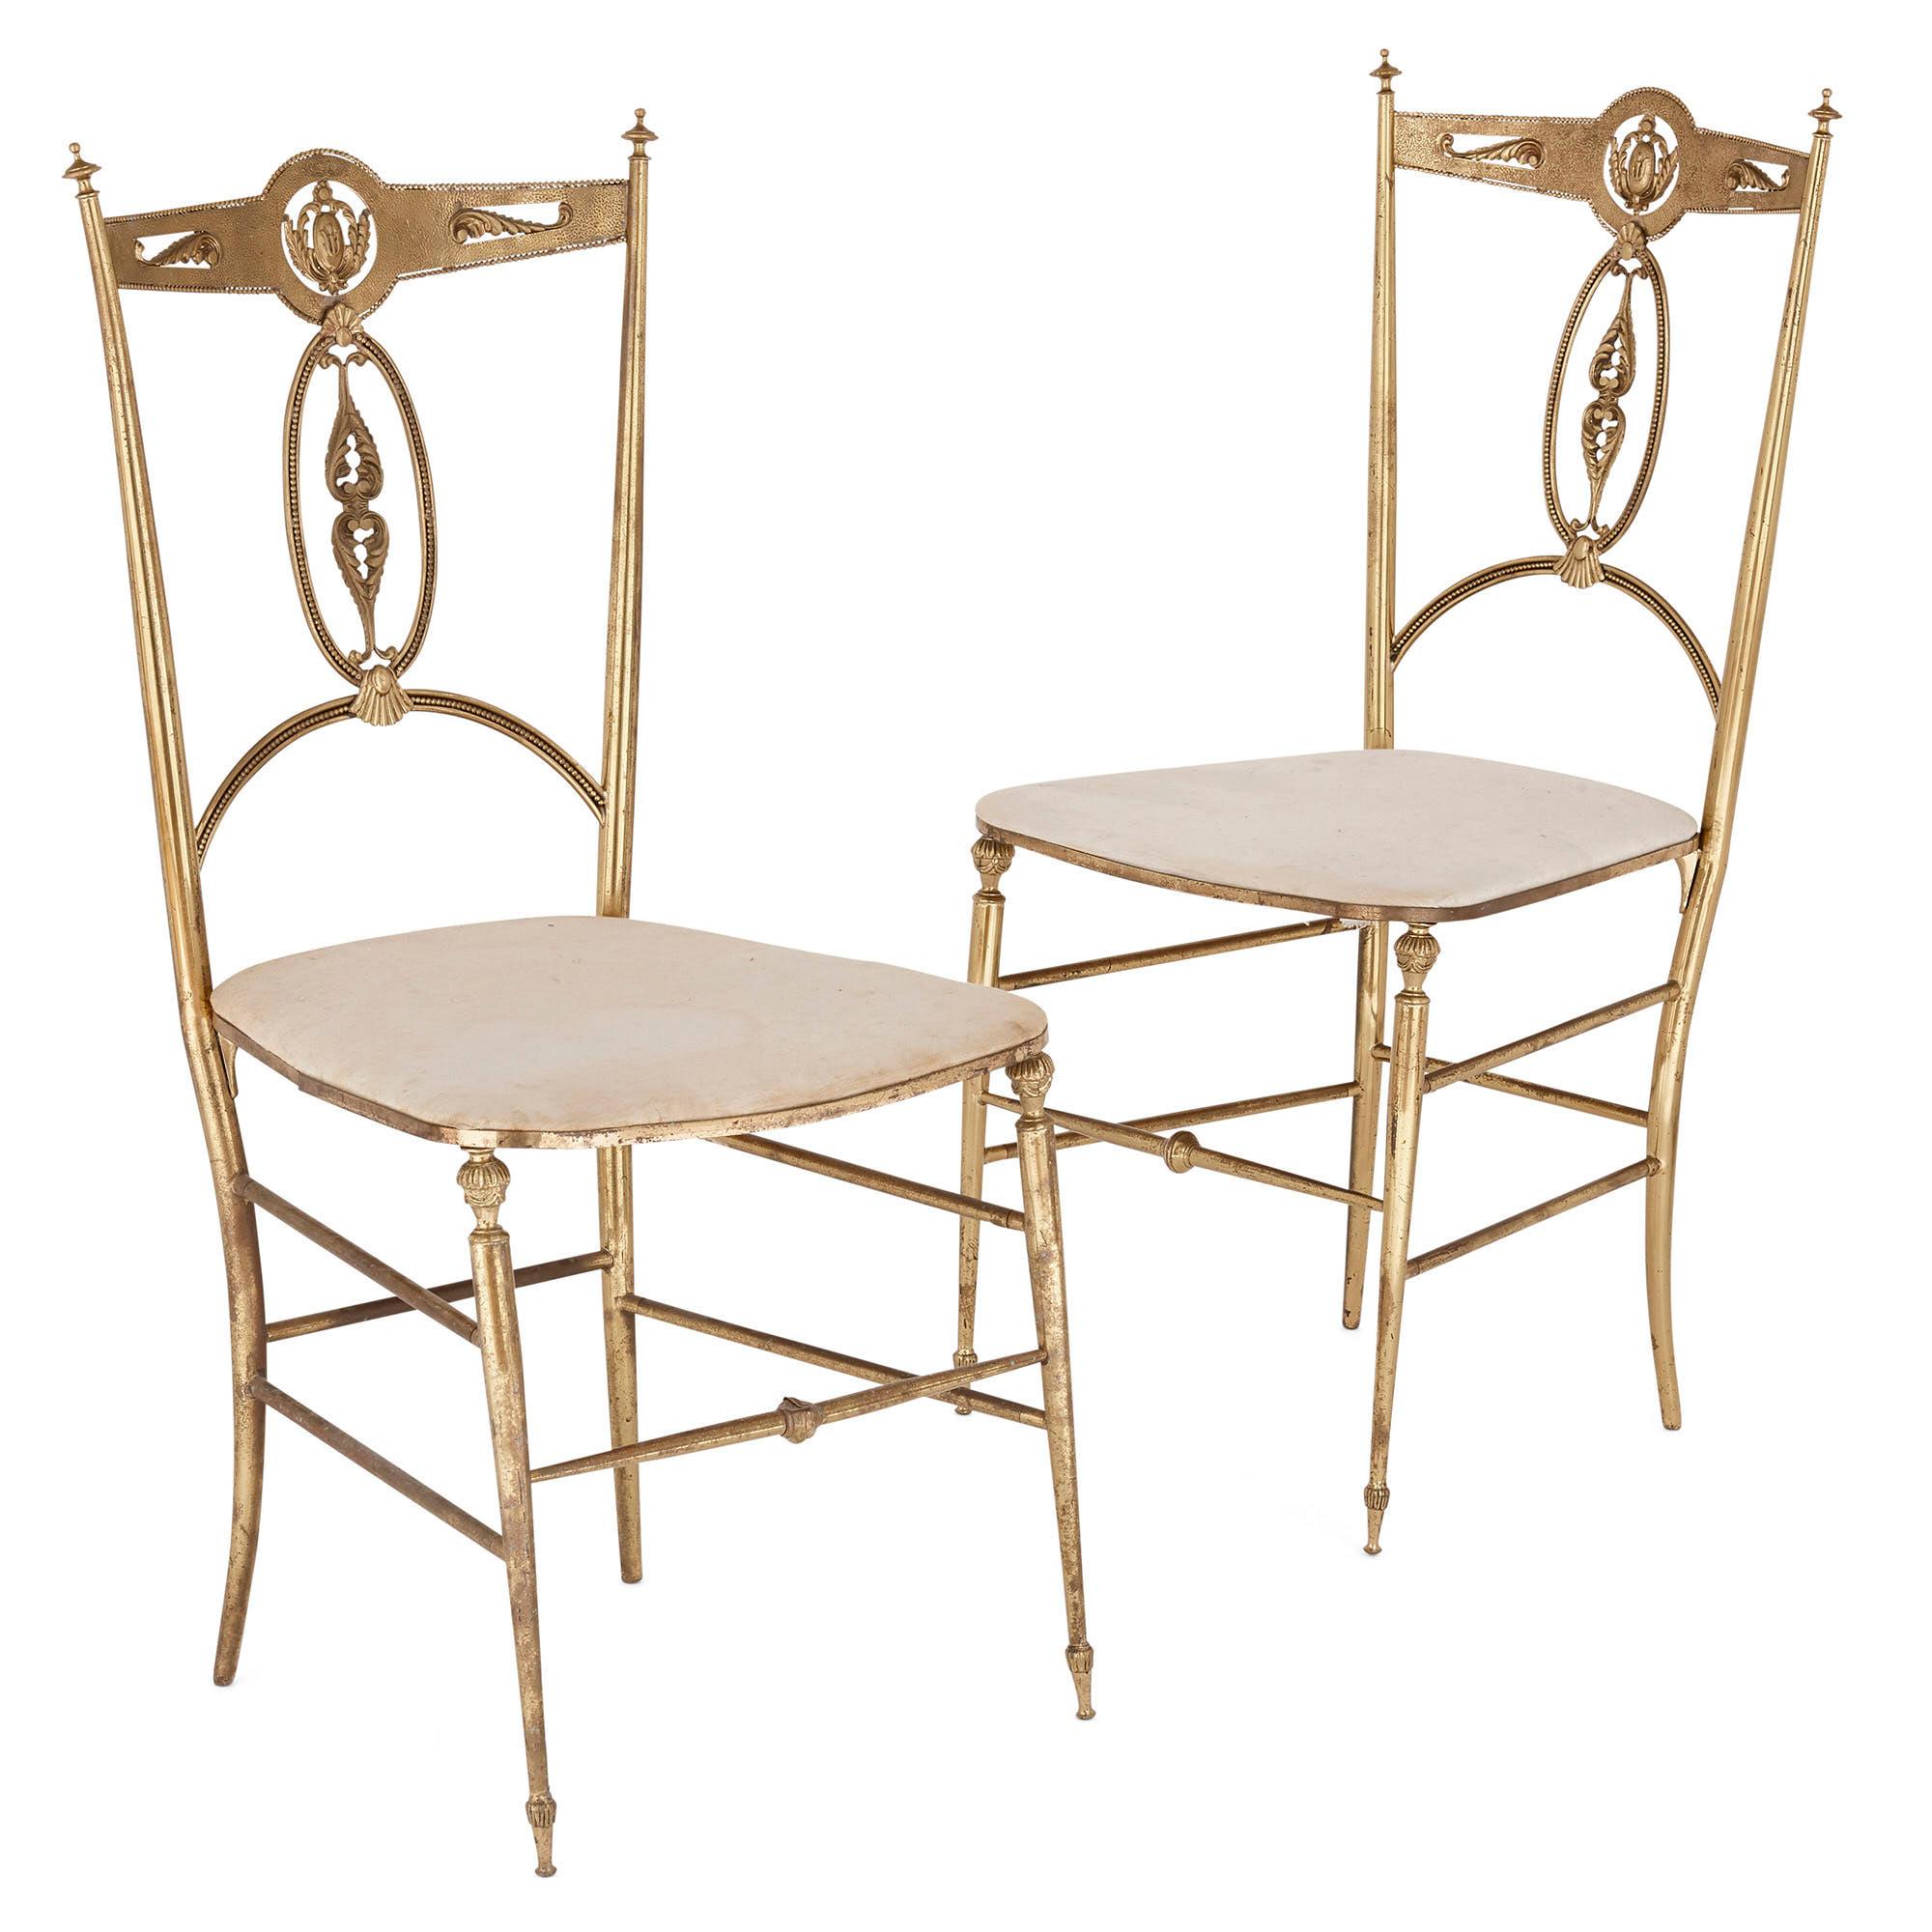 Four Italian 'Chiavari' brass and velvet chairs
Italian, early 20th century
Measures: Height 91cm, width 42cm, depth 40cm

The chairs in this set of four are crafted from brass, rendering each chair both elegant in form and light in weight. Each